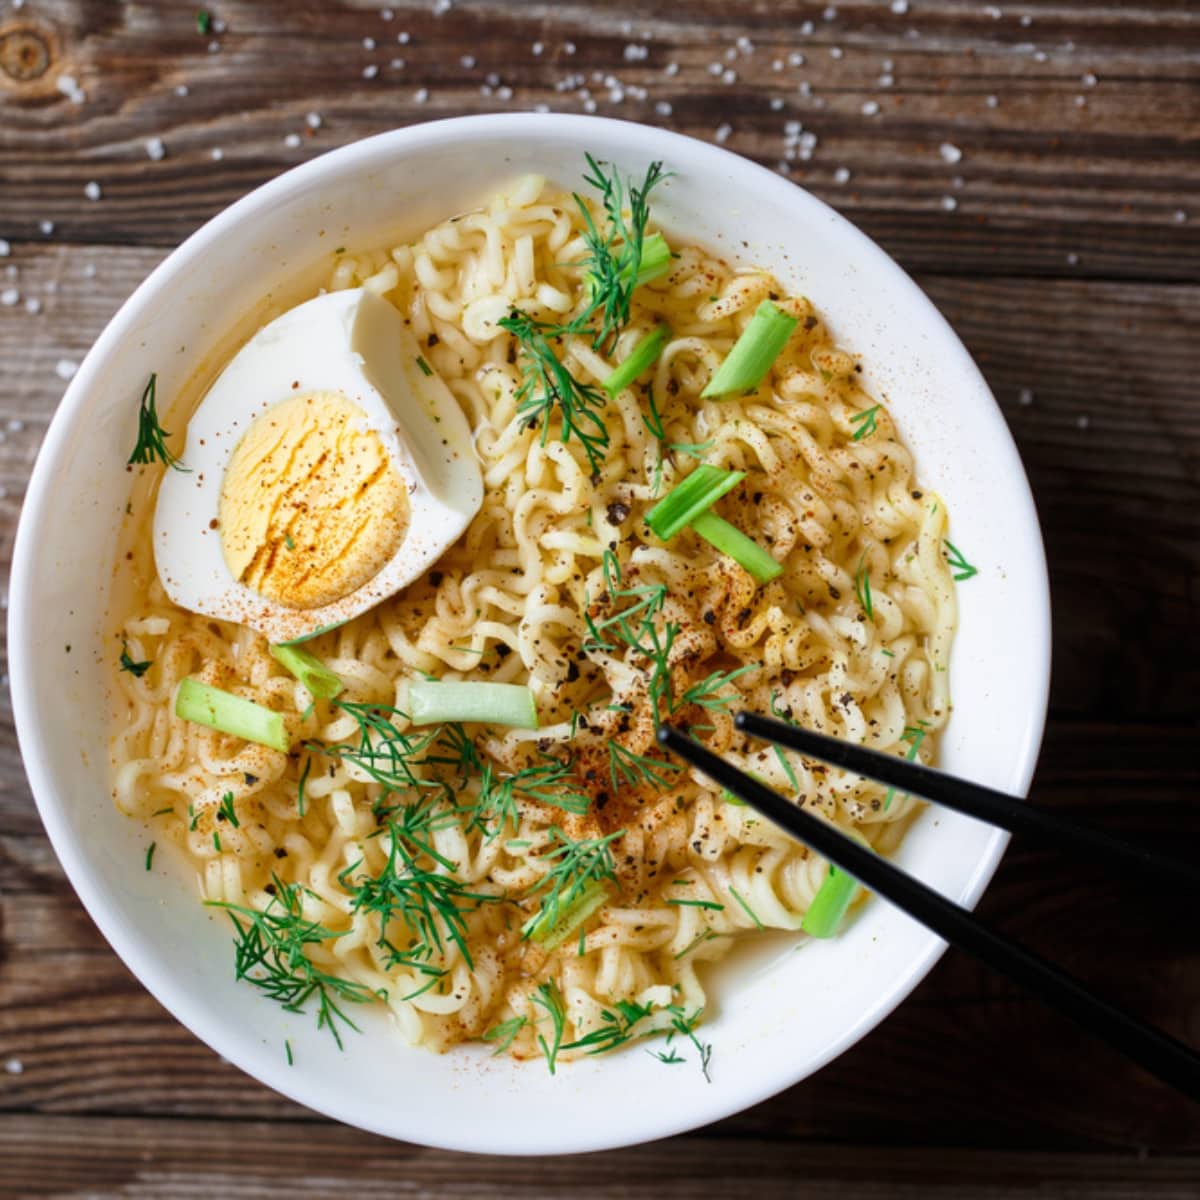 Bowl of Ramen Noodles With Boiled Eggs, Sliced Onions and Herbs and Chopsticks